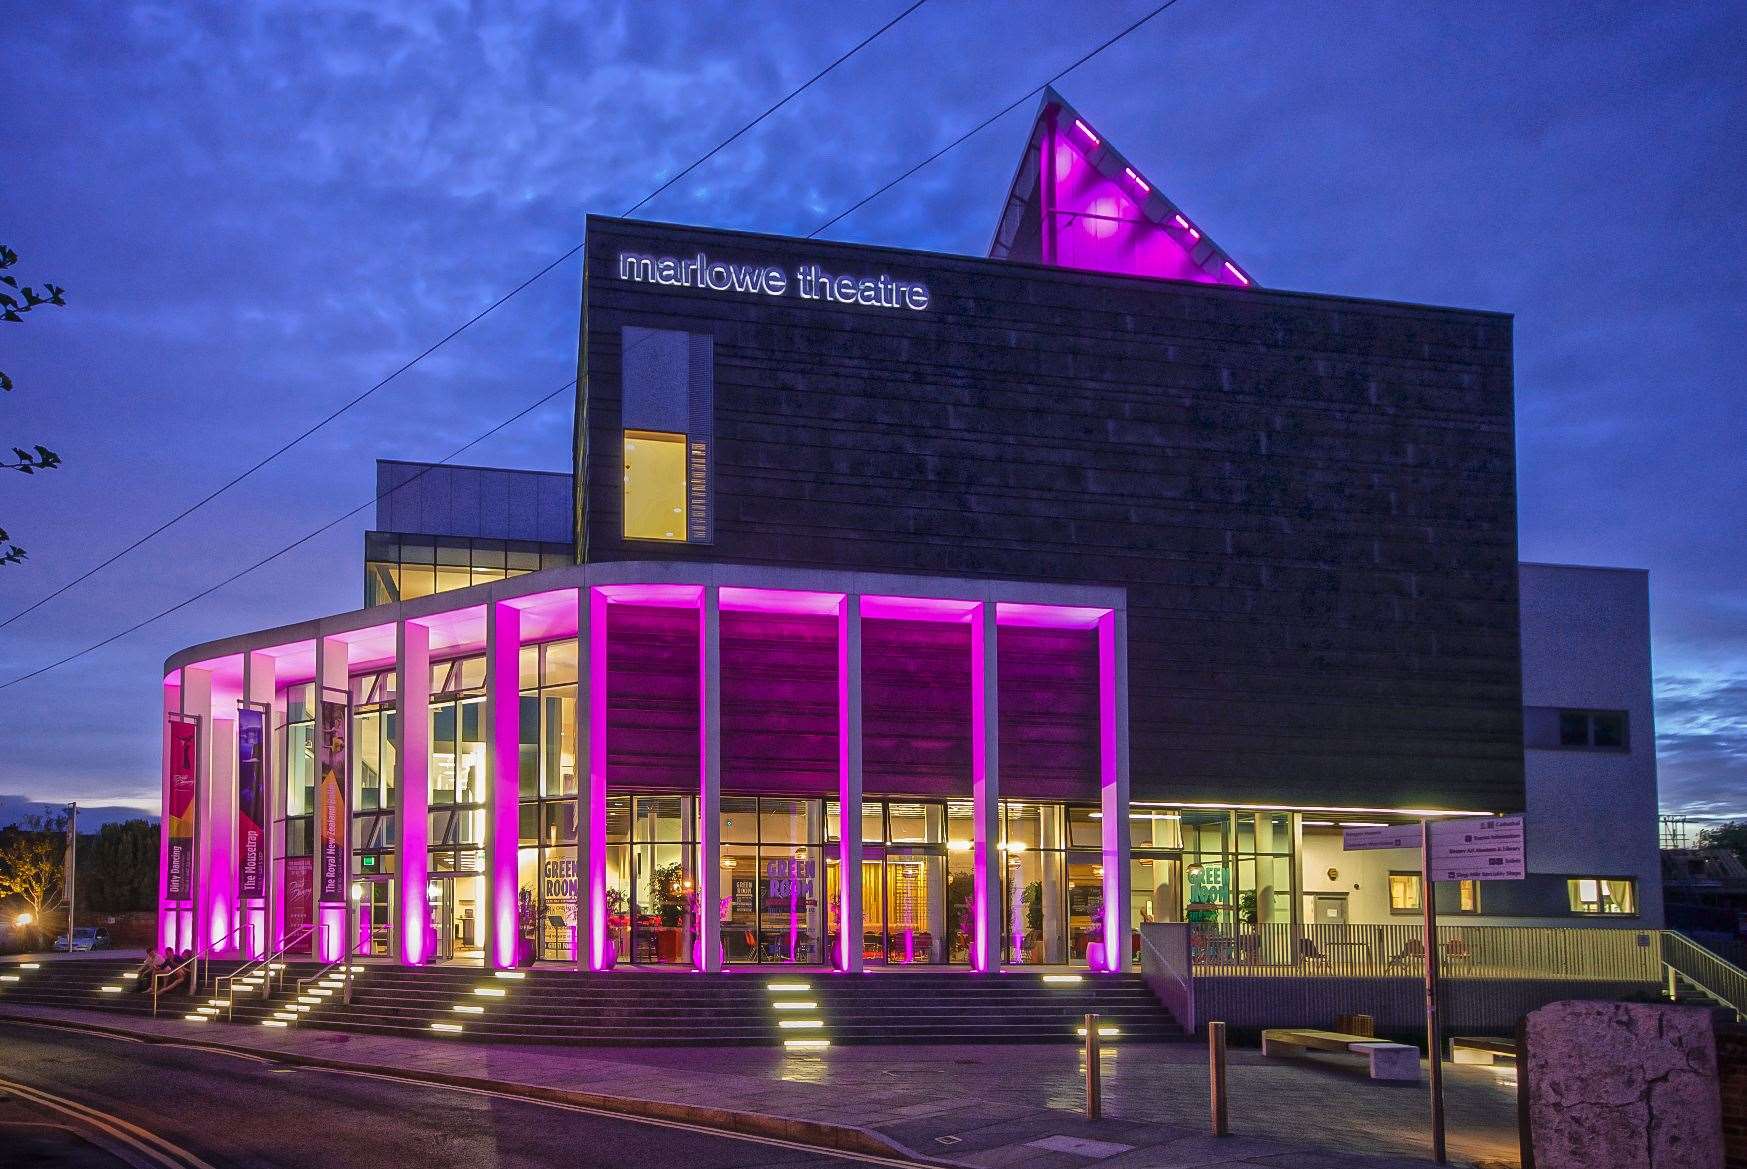 The Marlowe Theatre in Canterbury has joined calls for emergency government funding